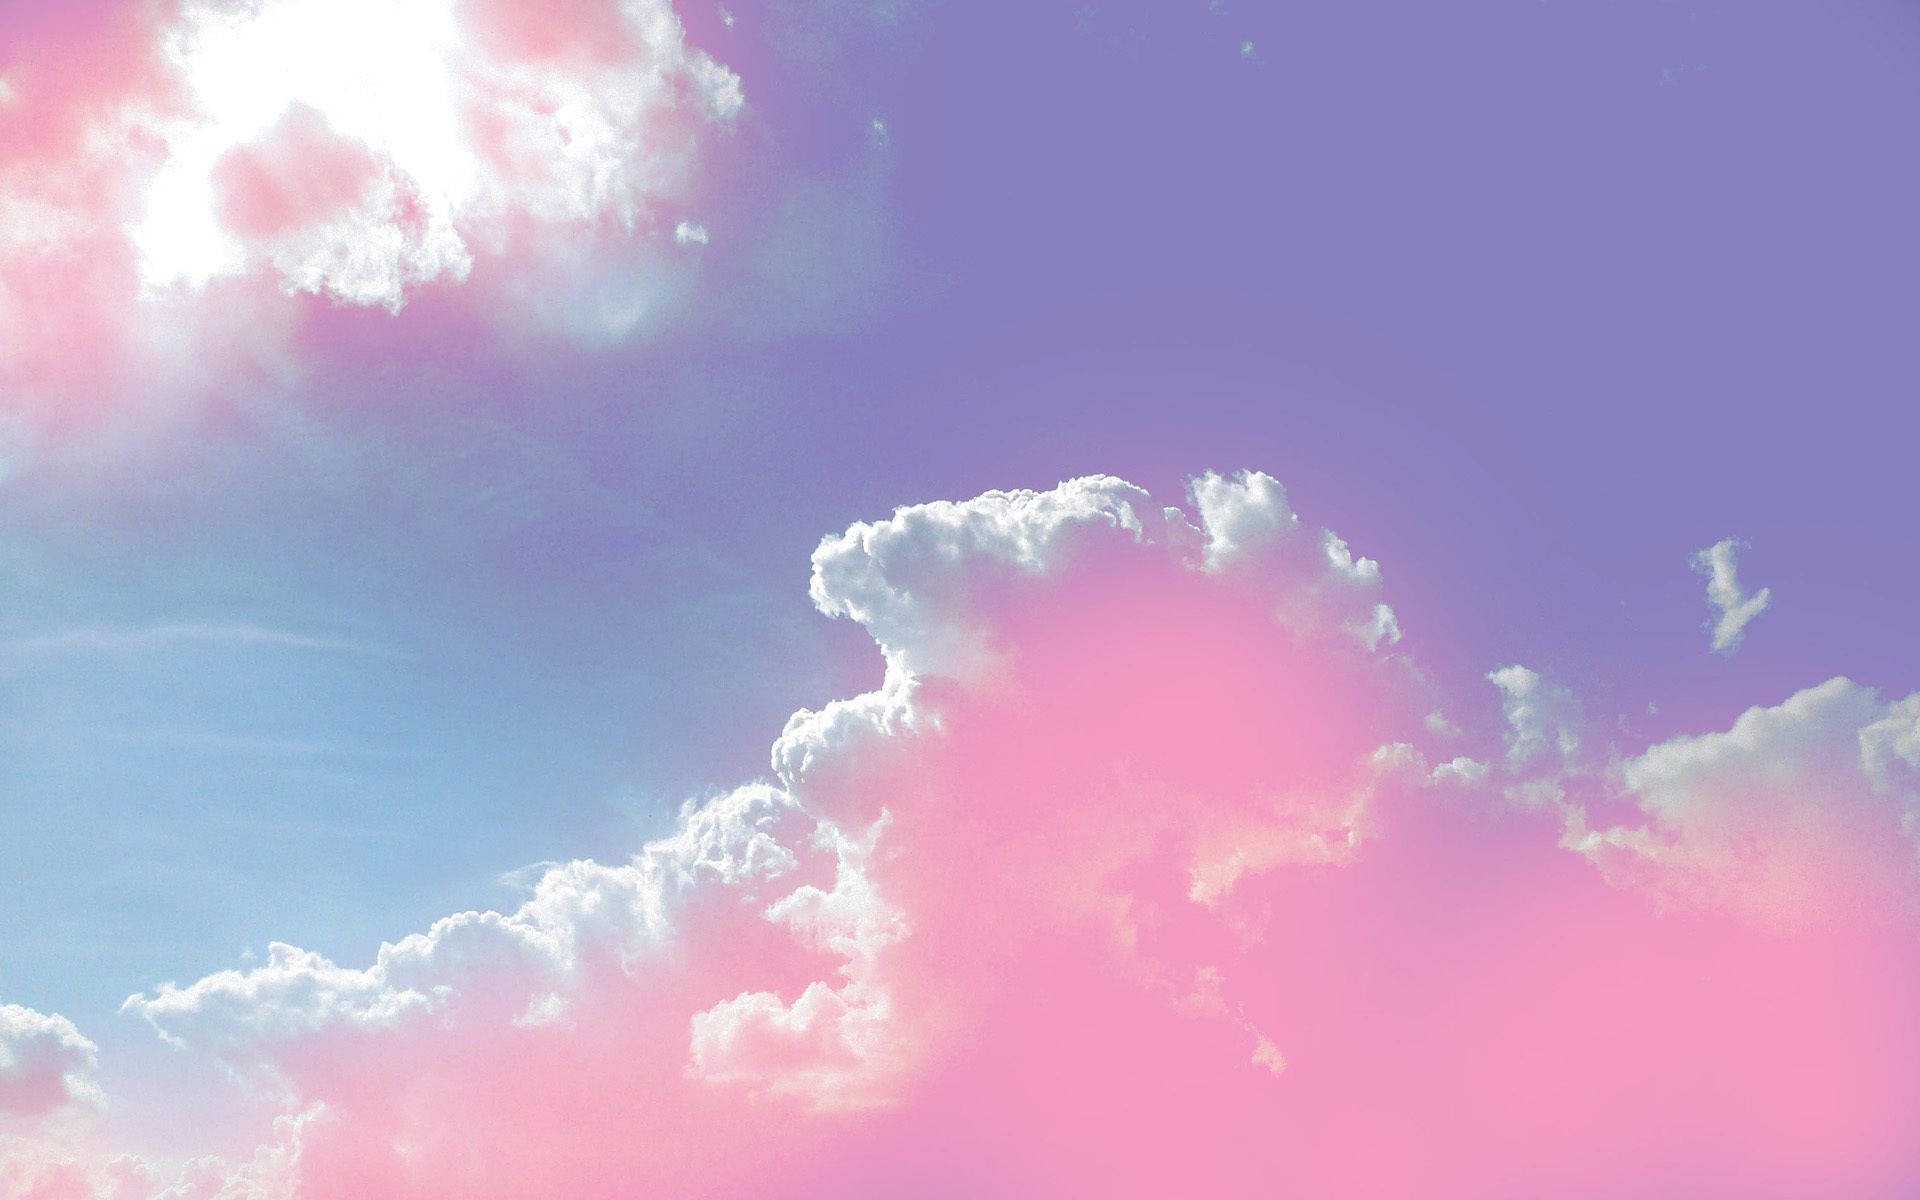 "bliss In Shades Of Pink - Majestic Pink Cloud" Wallpaper